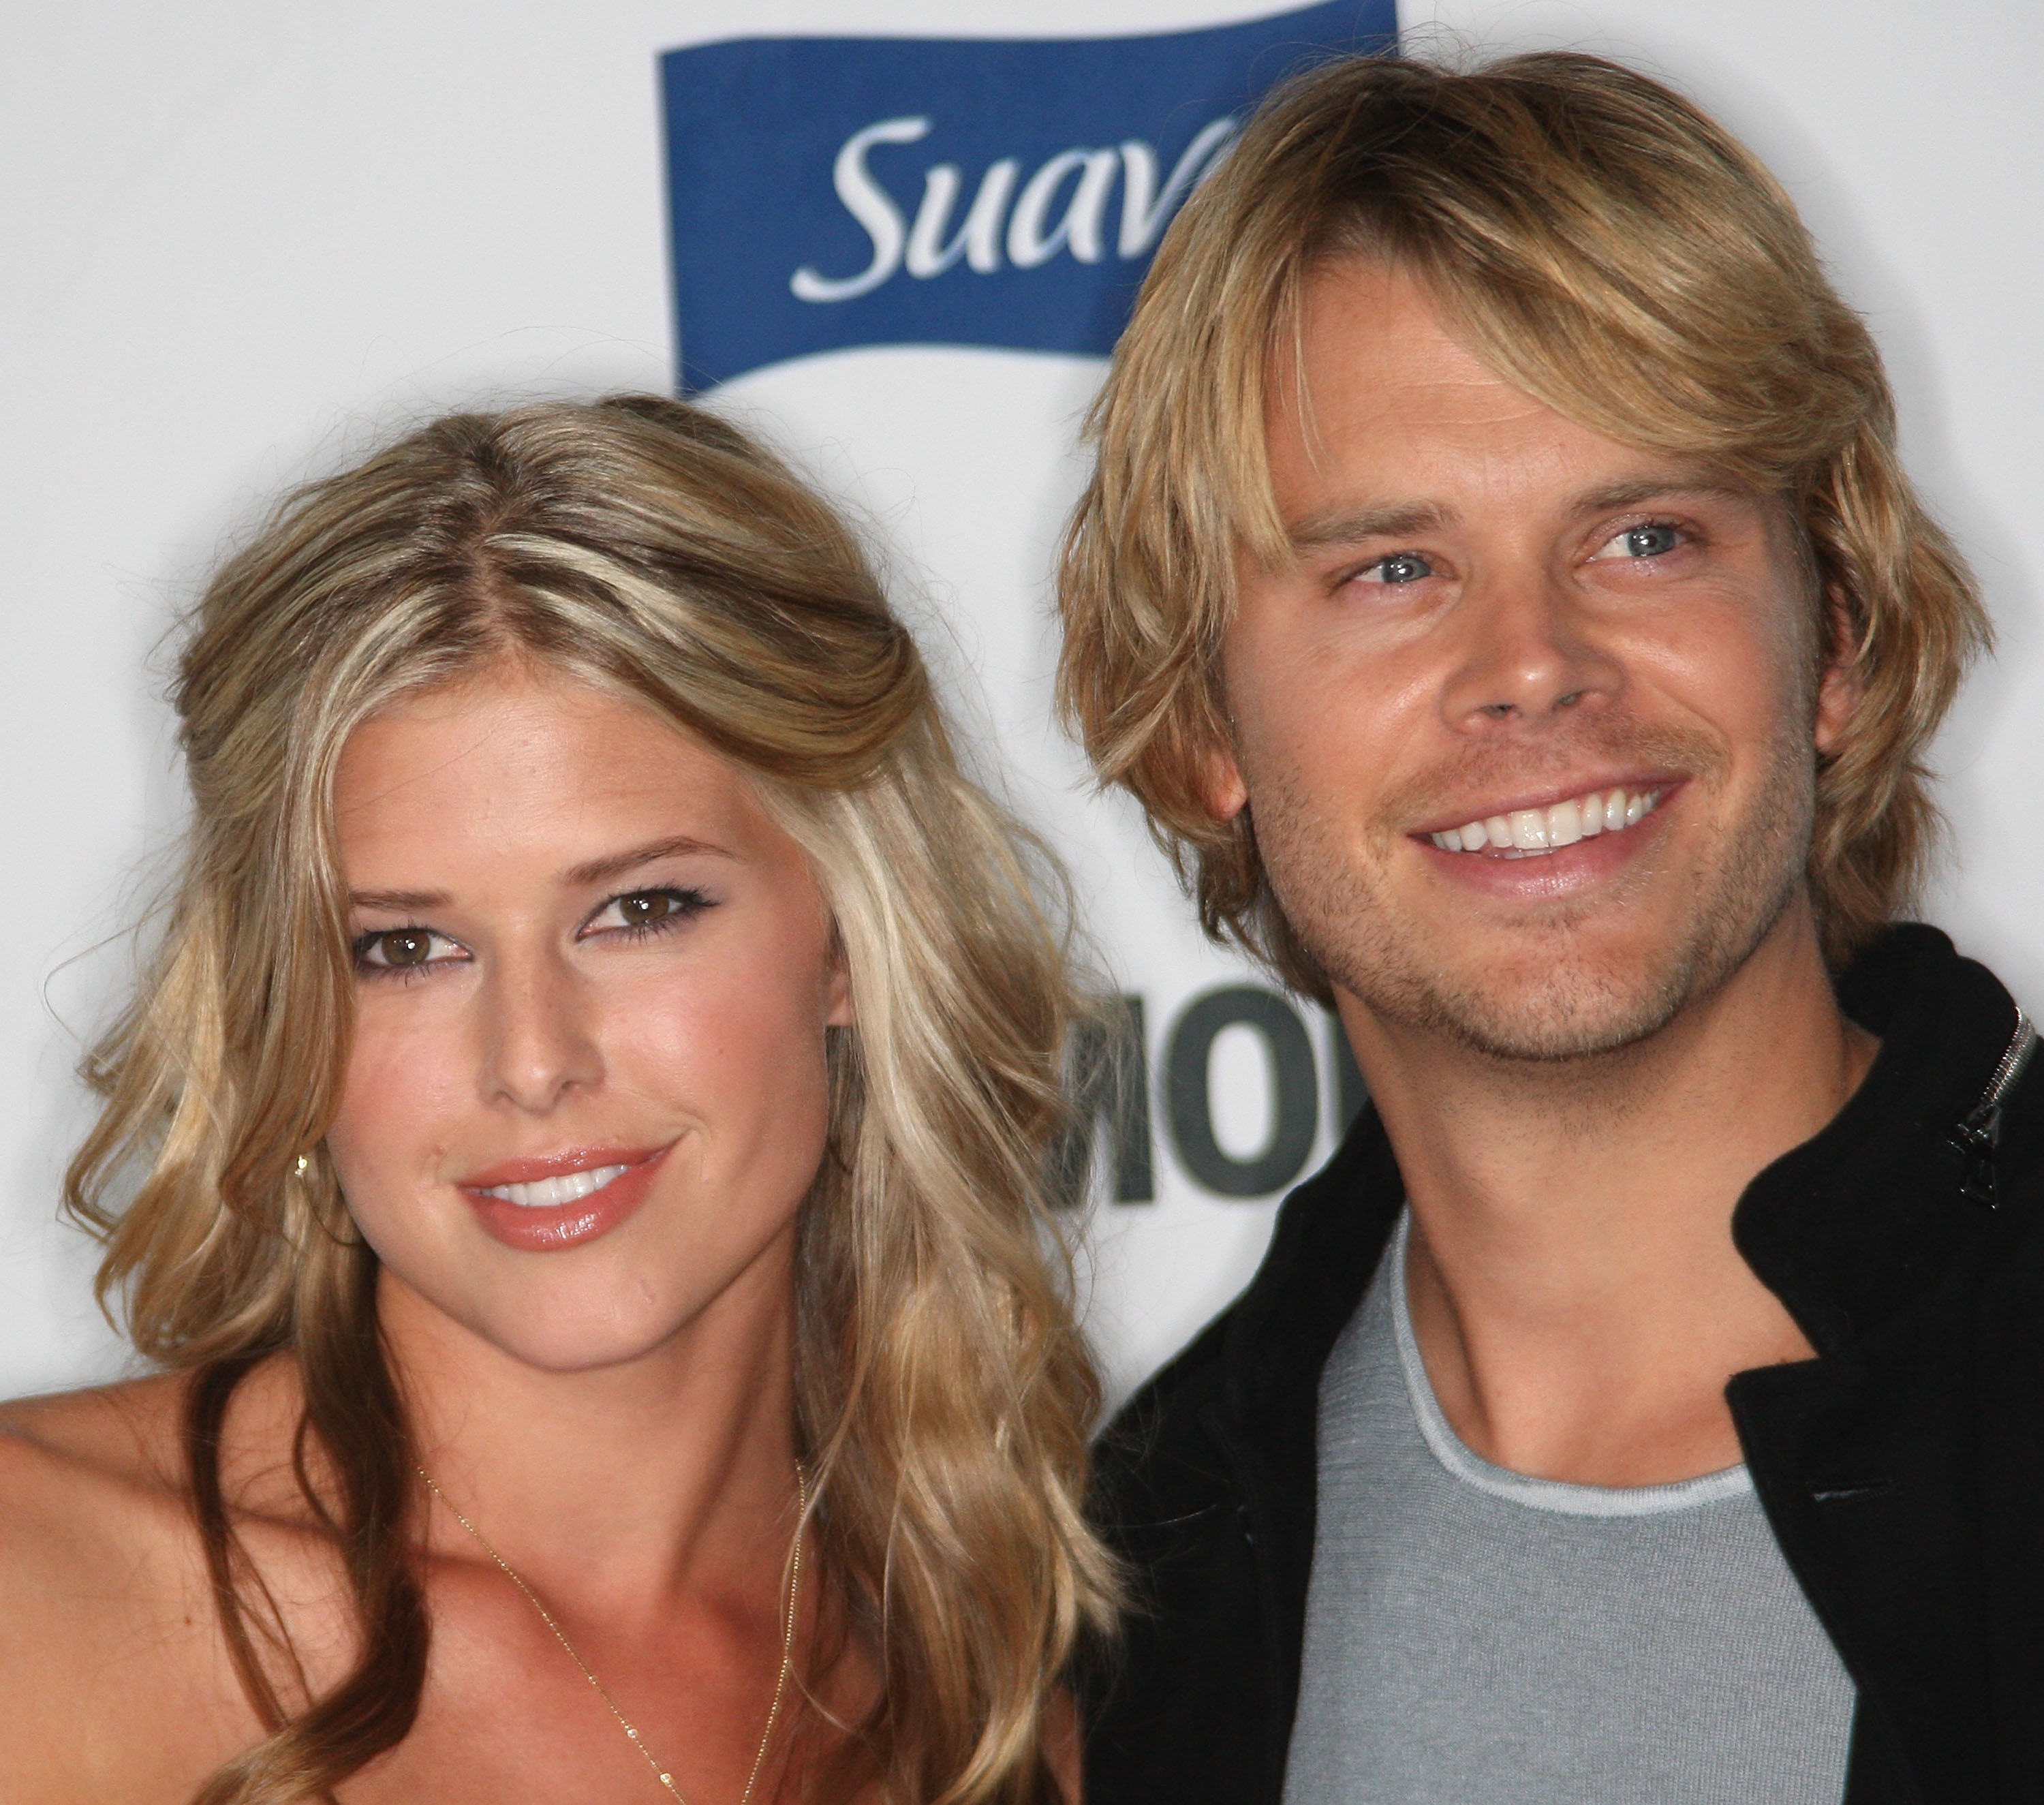 Sarah Wright and Eric Christian Olsen at the Glamour Reel Moments on October 14, 2008, in Los Angeles, California | Source: Getty Images